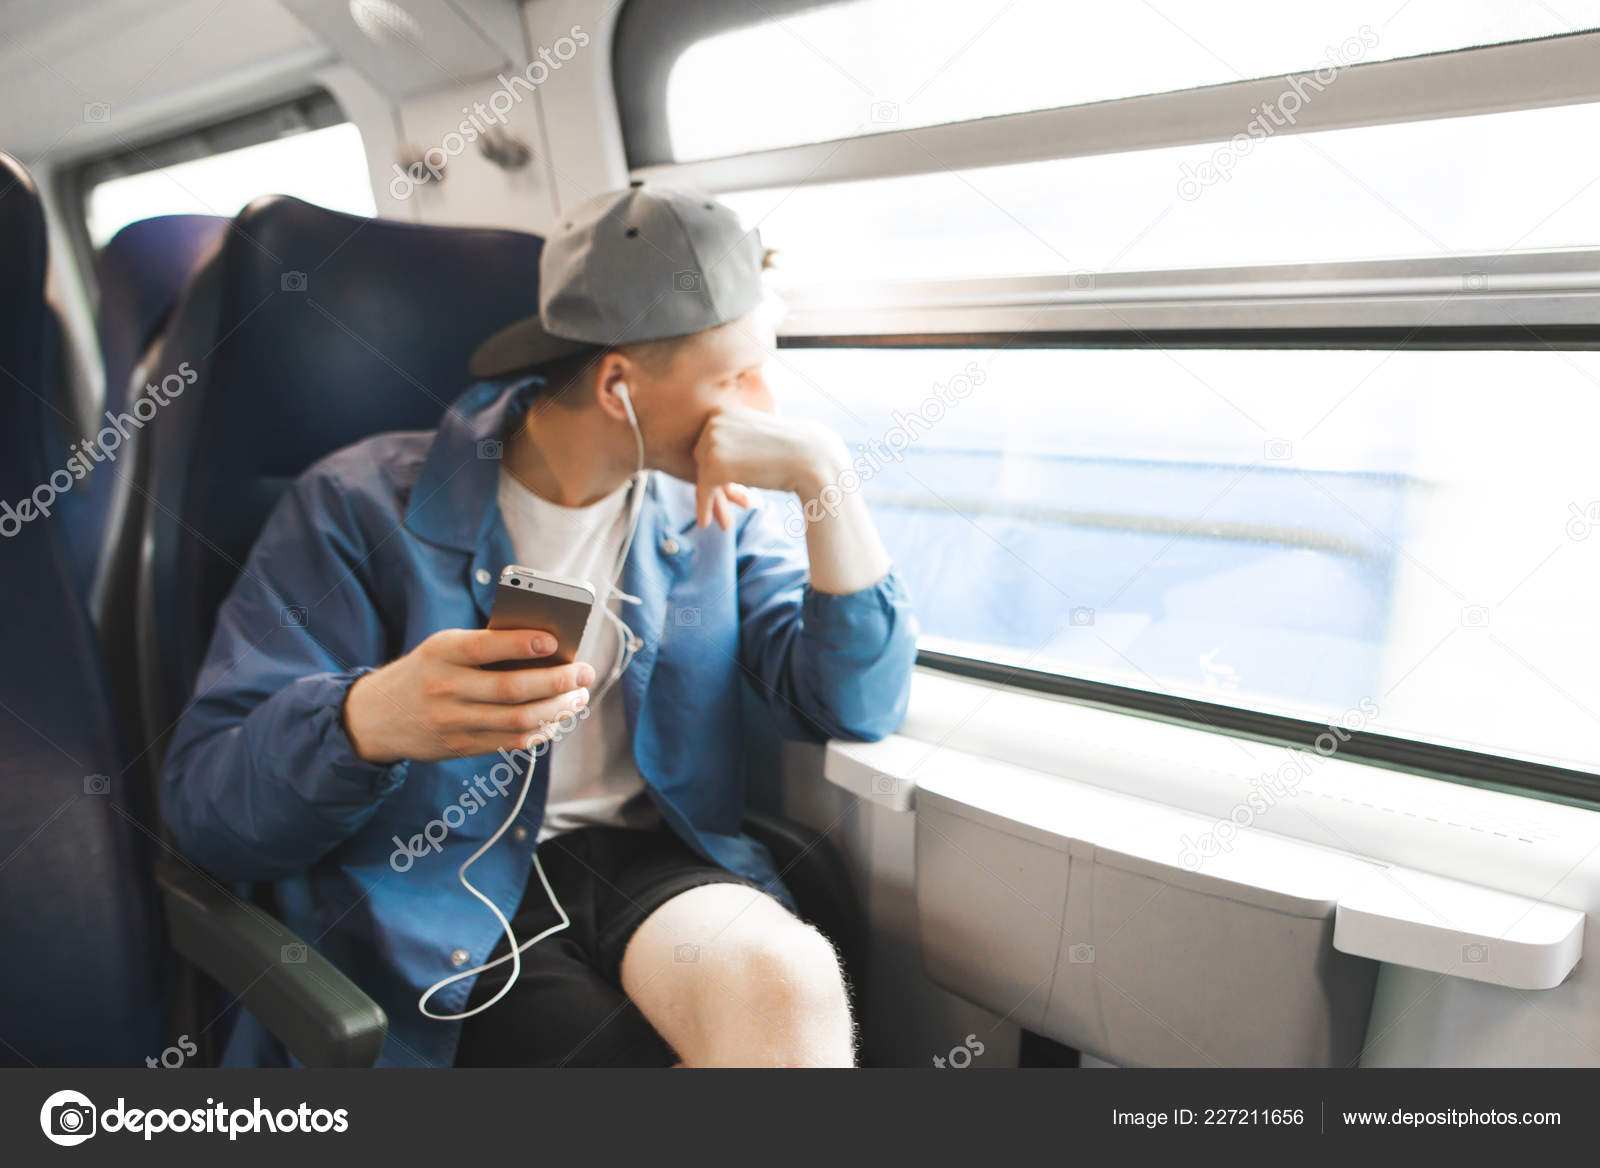 Young Man Looking Out Of Train Window Stock Photo - Download Image